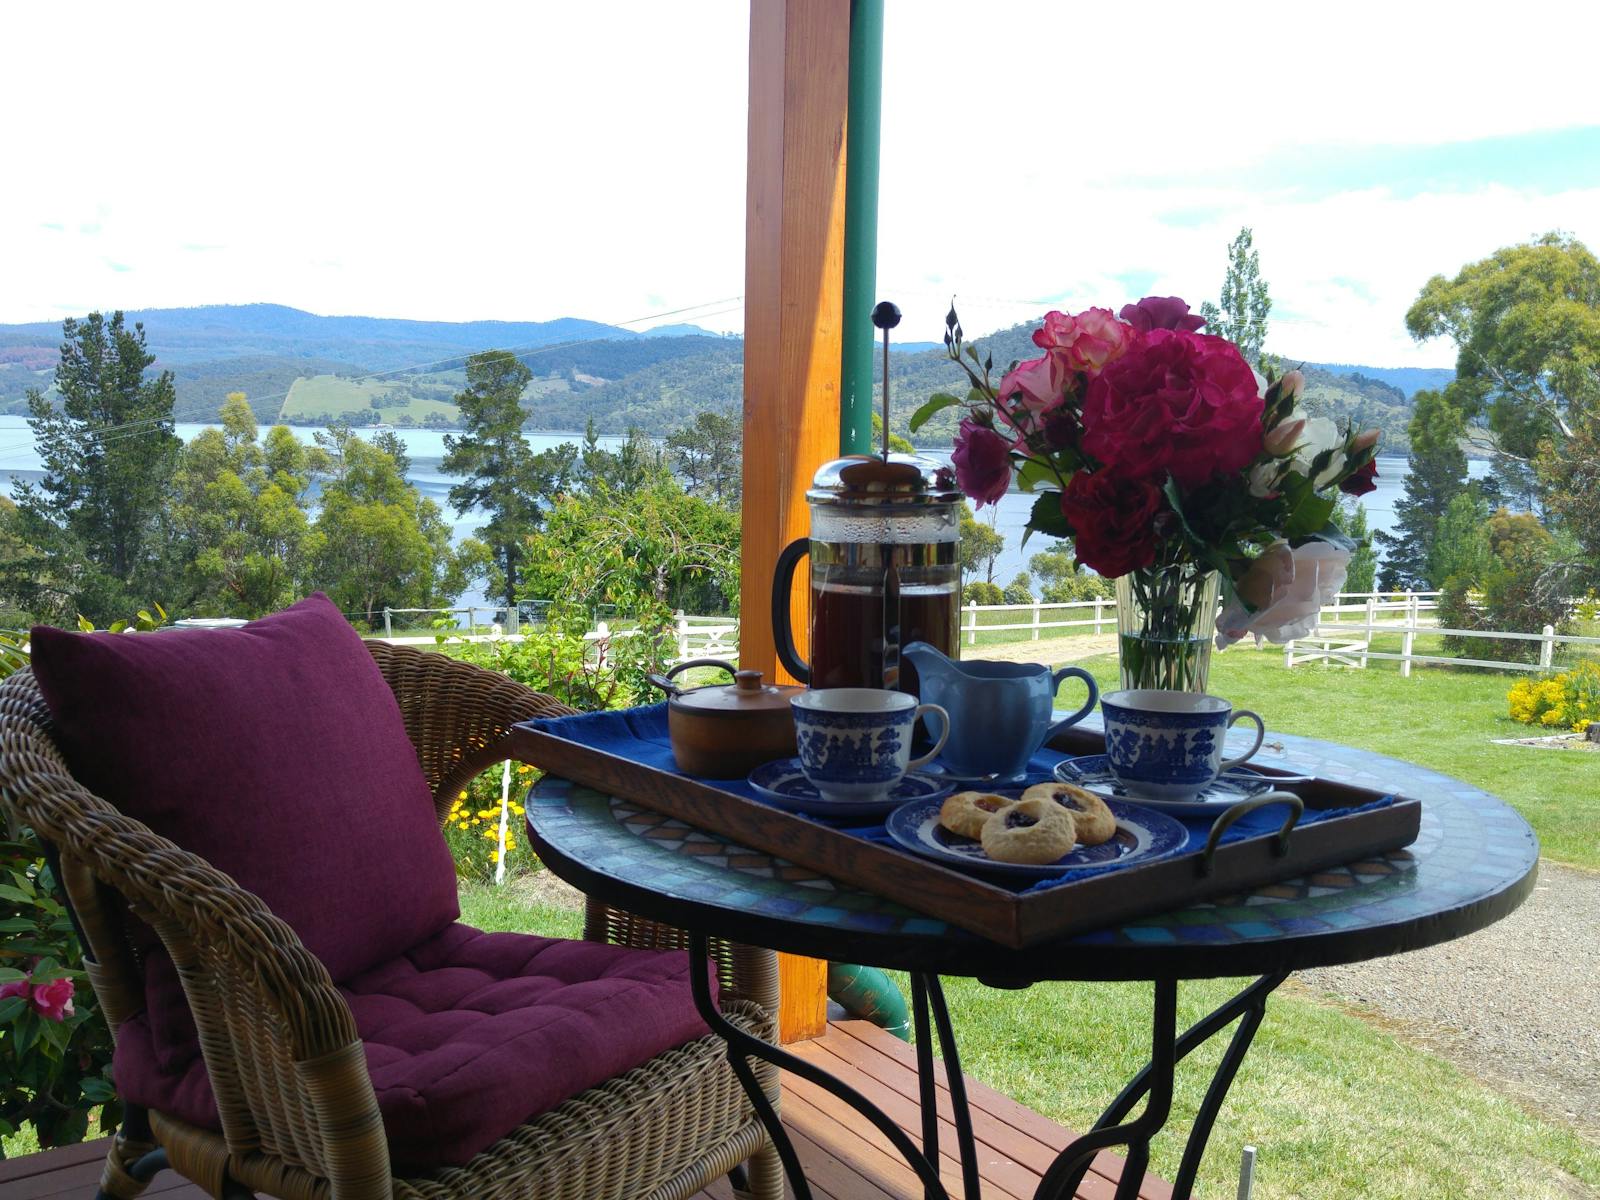 Afternoon tea on arrival with views of the Huon River and Hartz Mountains